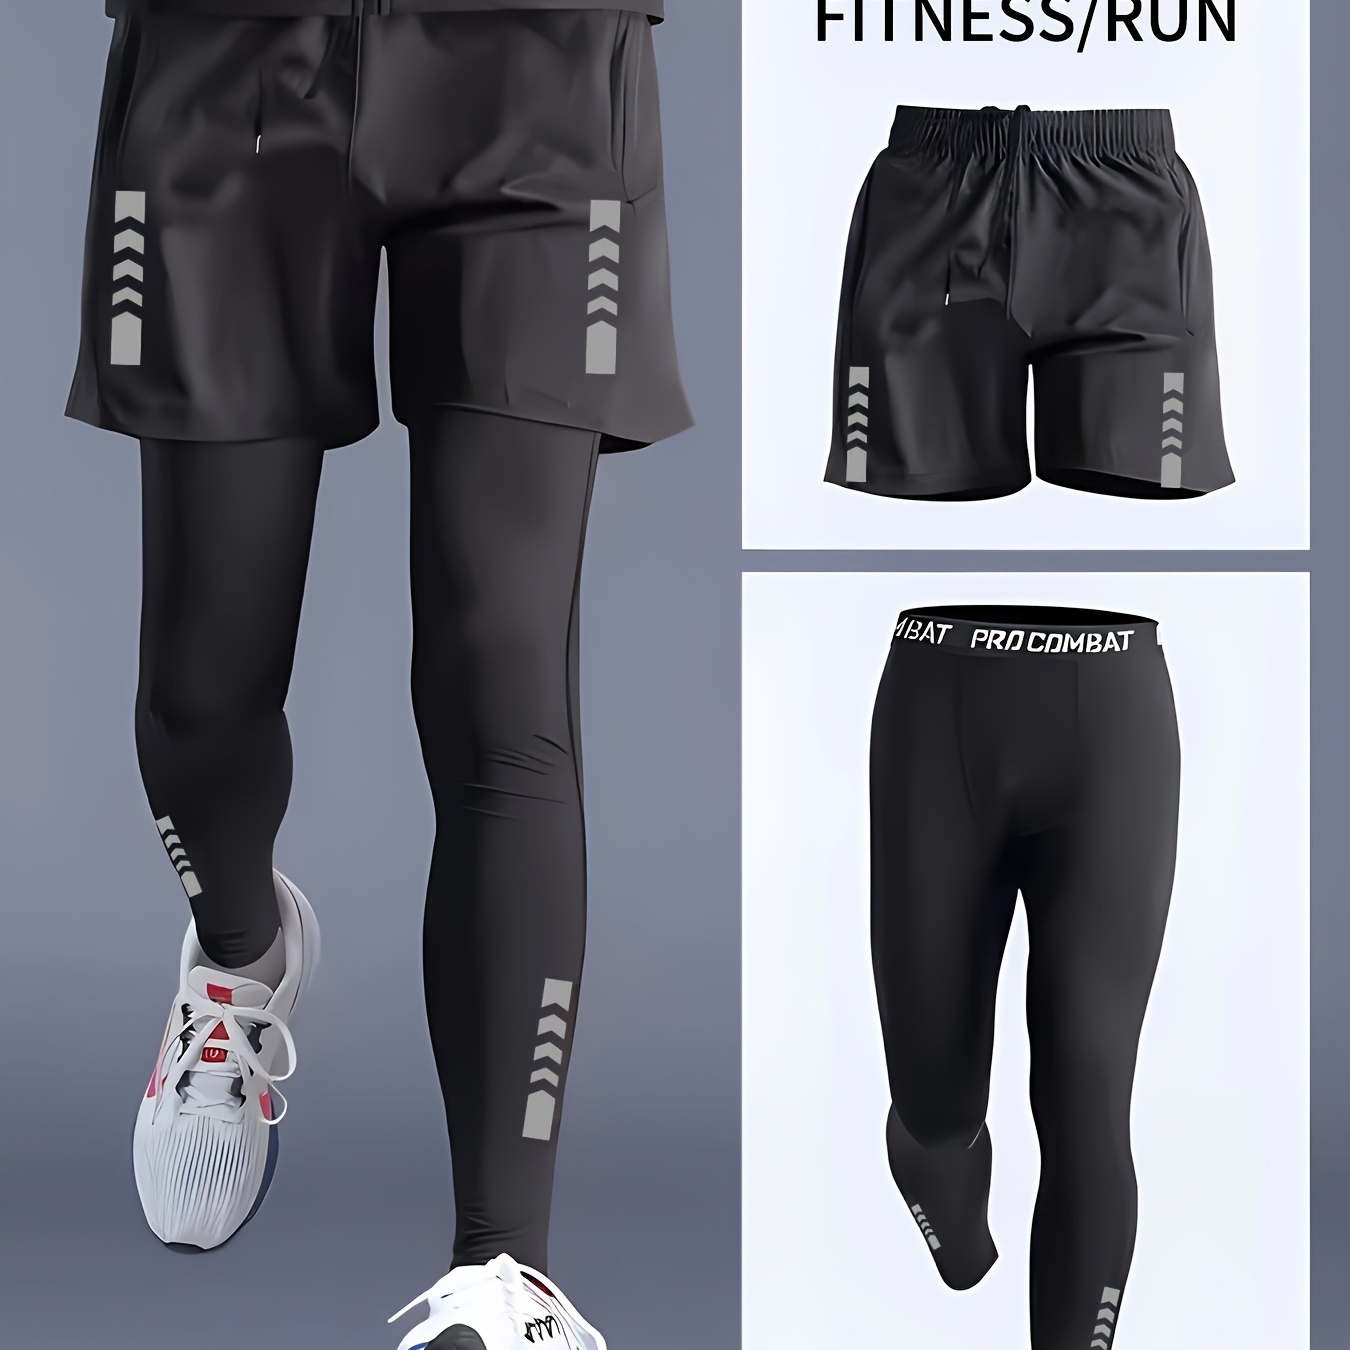 

2-piece Men's Summer Gym Fitness Outfit Set, Men's Breathable Drawstring Shorts With Pockets & Tight Stretch Compression Leggings Set